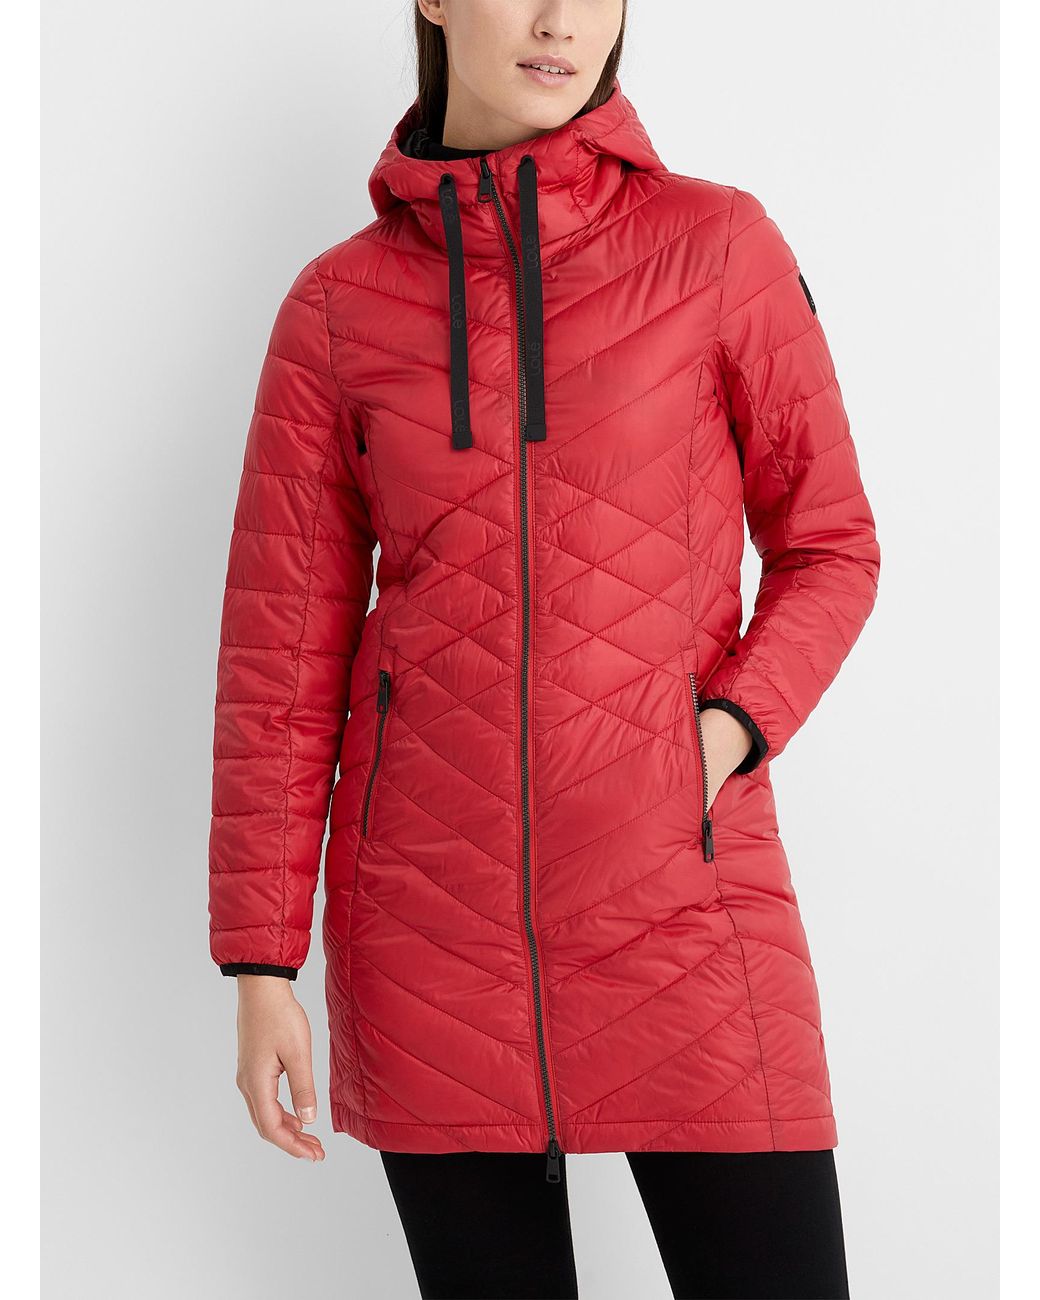 Lolë Synthetic Claudia Packable Puffer Jacket in Red - Lyst